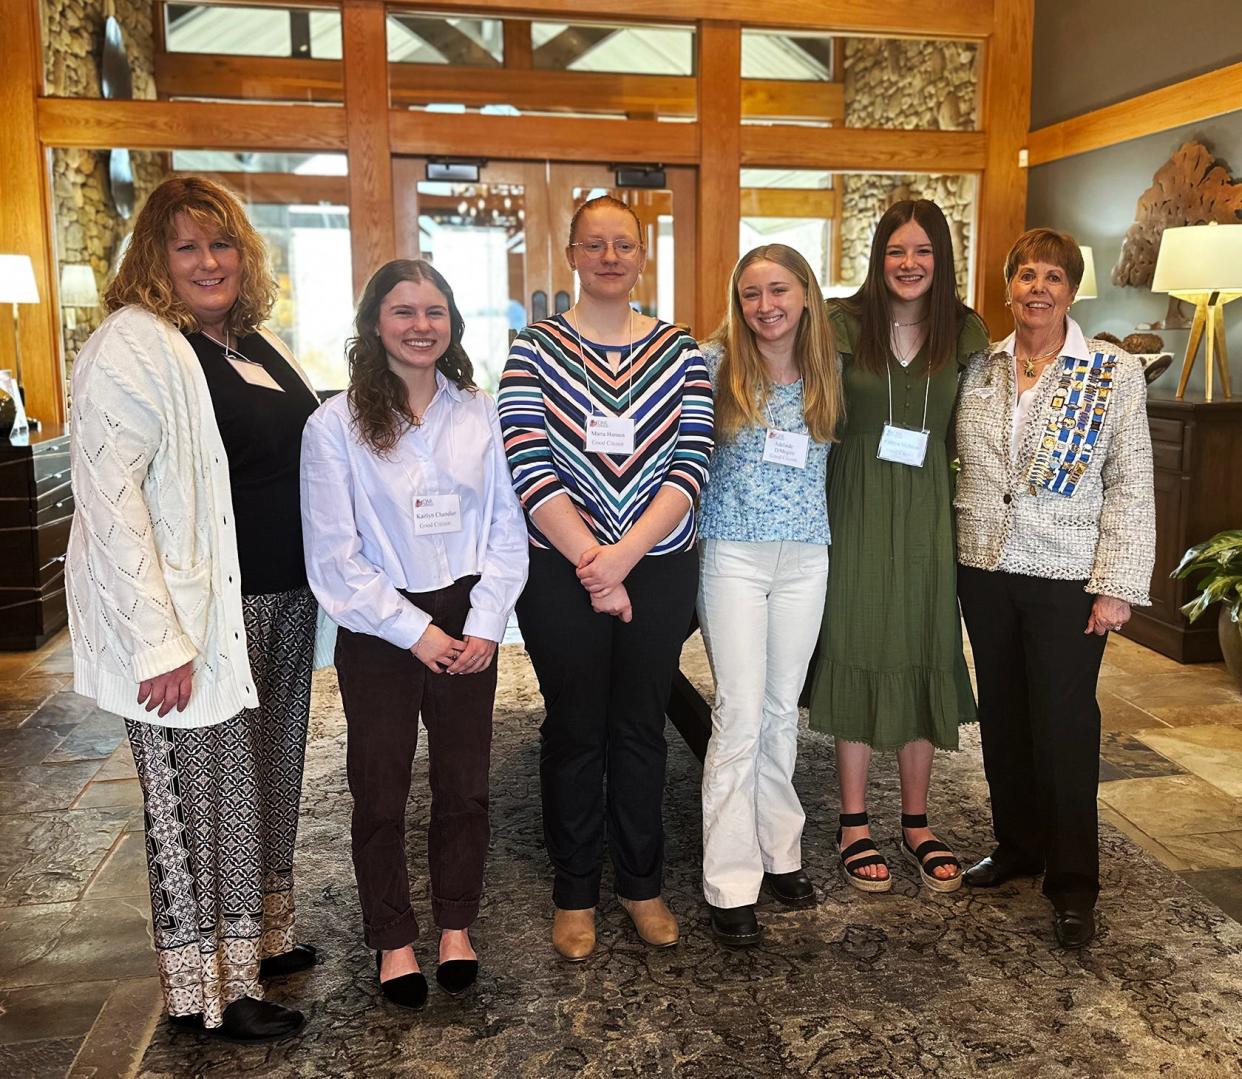 Pictured from left to right are Miriam Hood (Joseph McDowell Chapter Good Citizen chair), Kaitlyn Chandler, Maria Hansen, Adelaide DiMeglio, Caitlyn McMinn, and Charlotte Walsh (Chapter Regent).